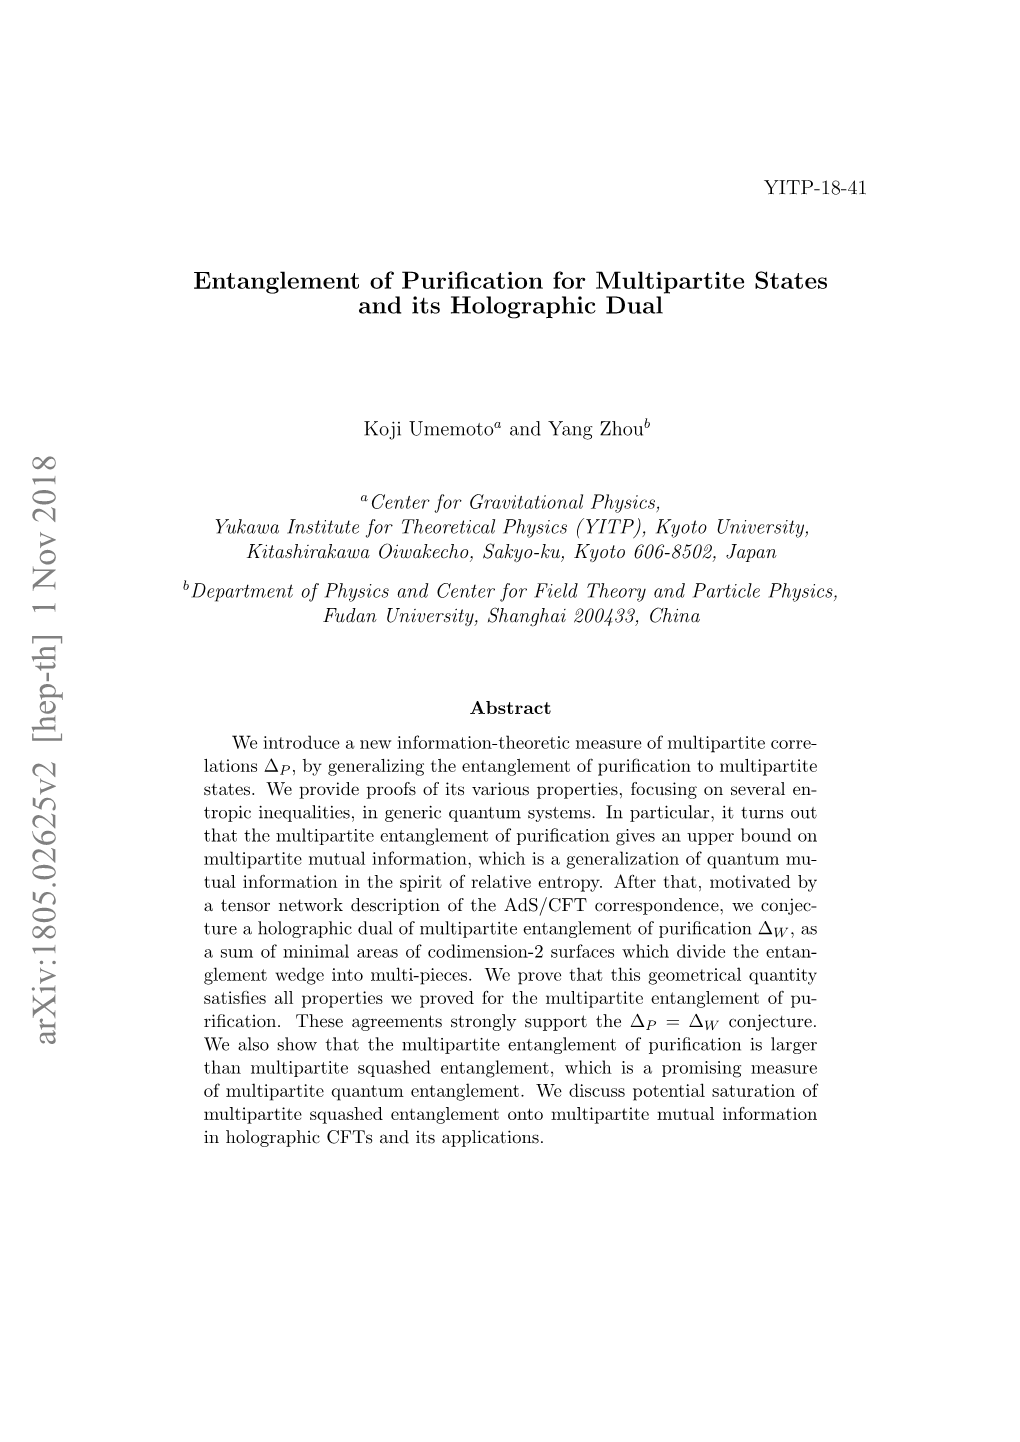 Entanglement of Purification for Multipartite States and Its